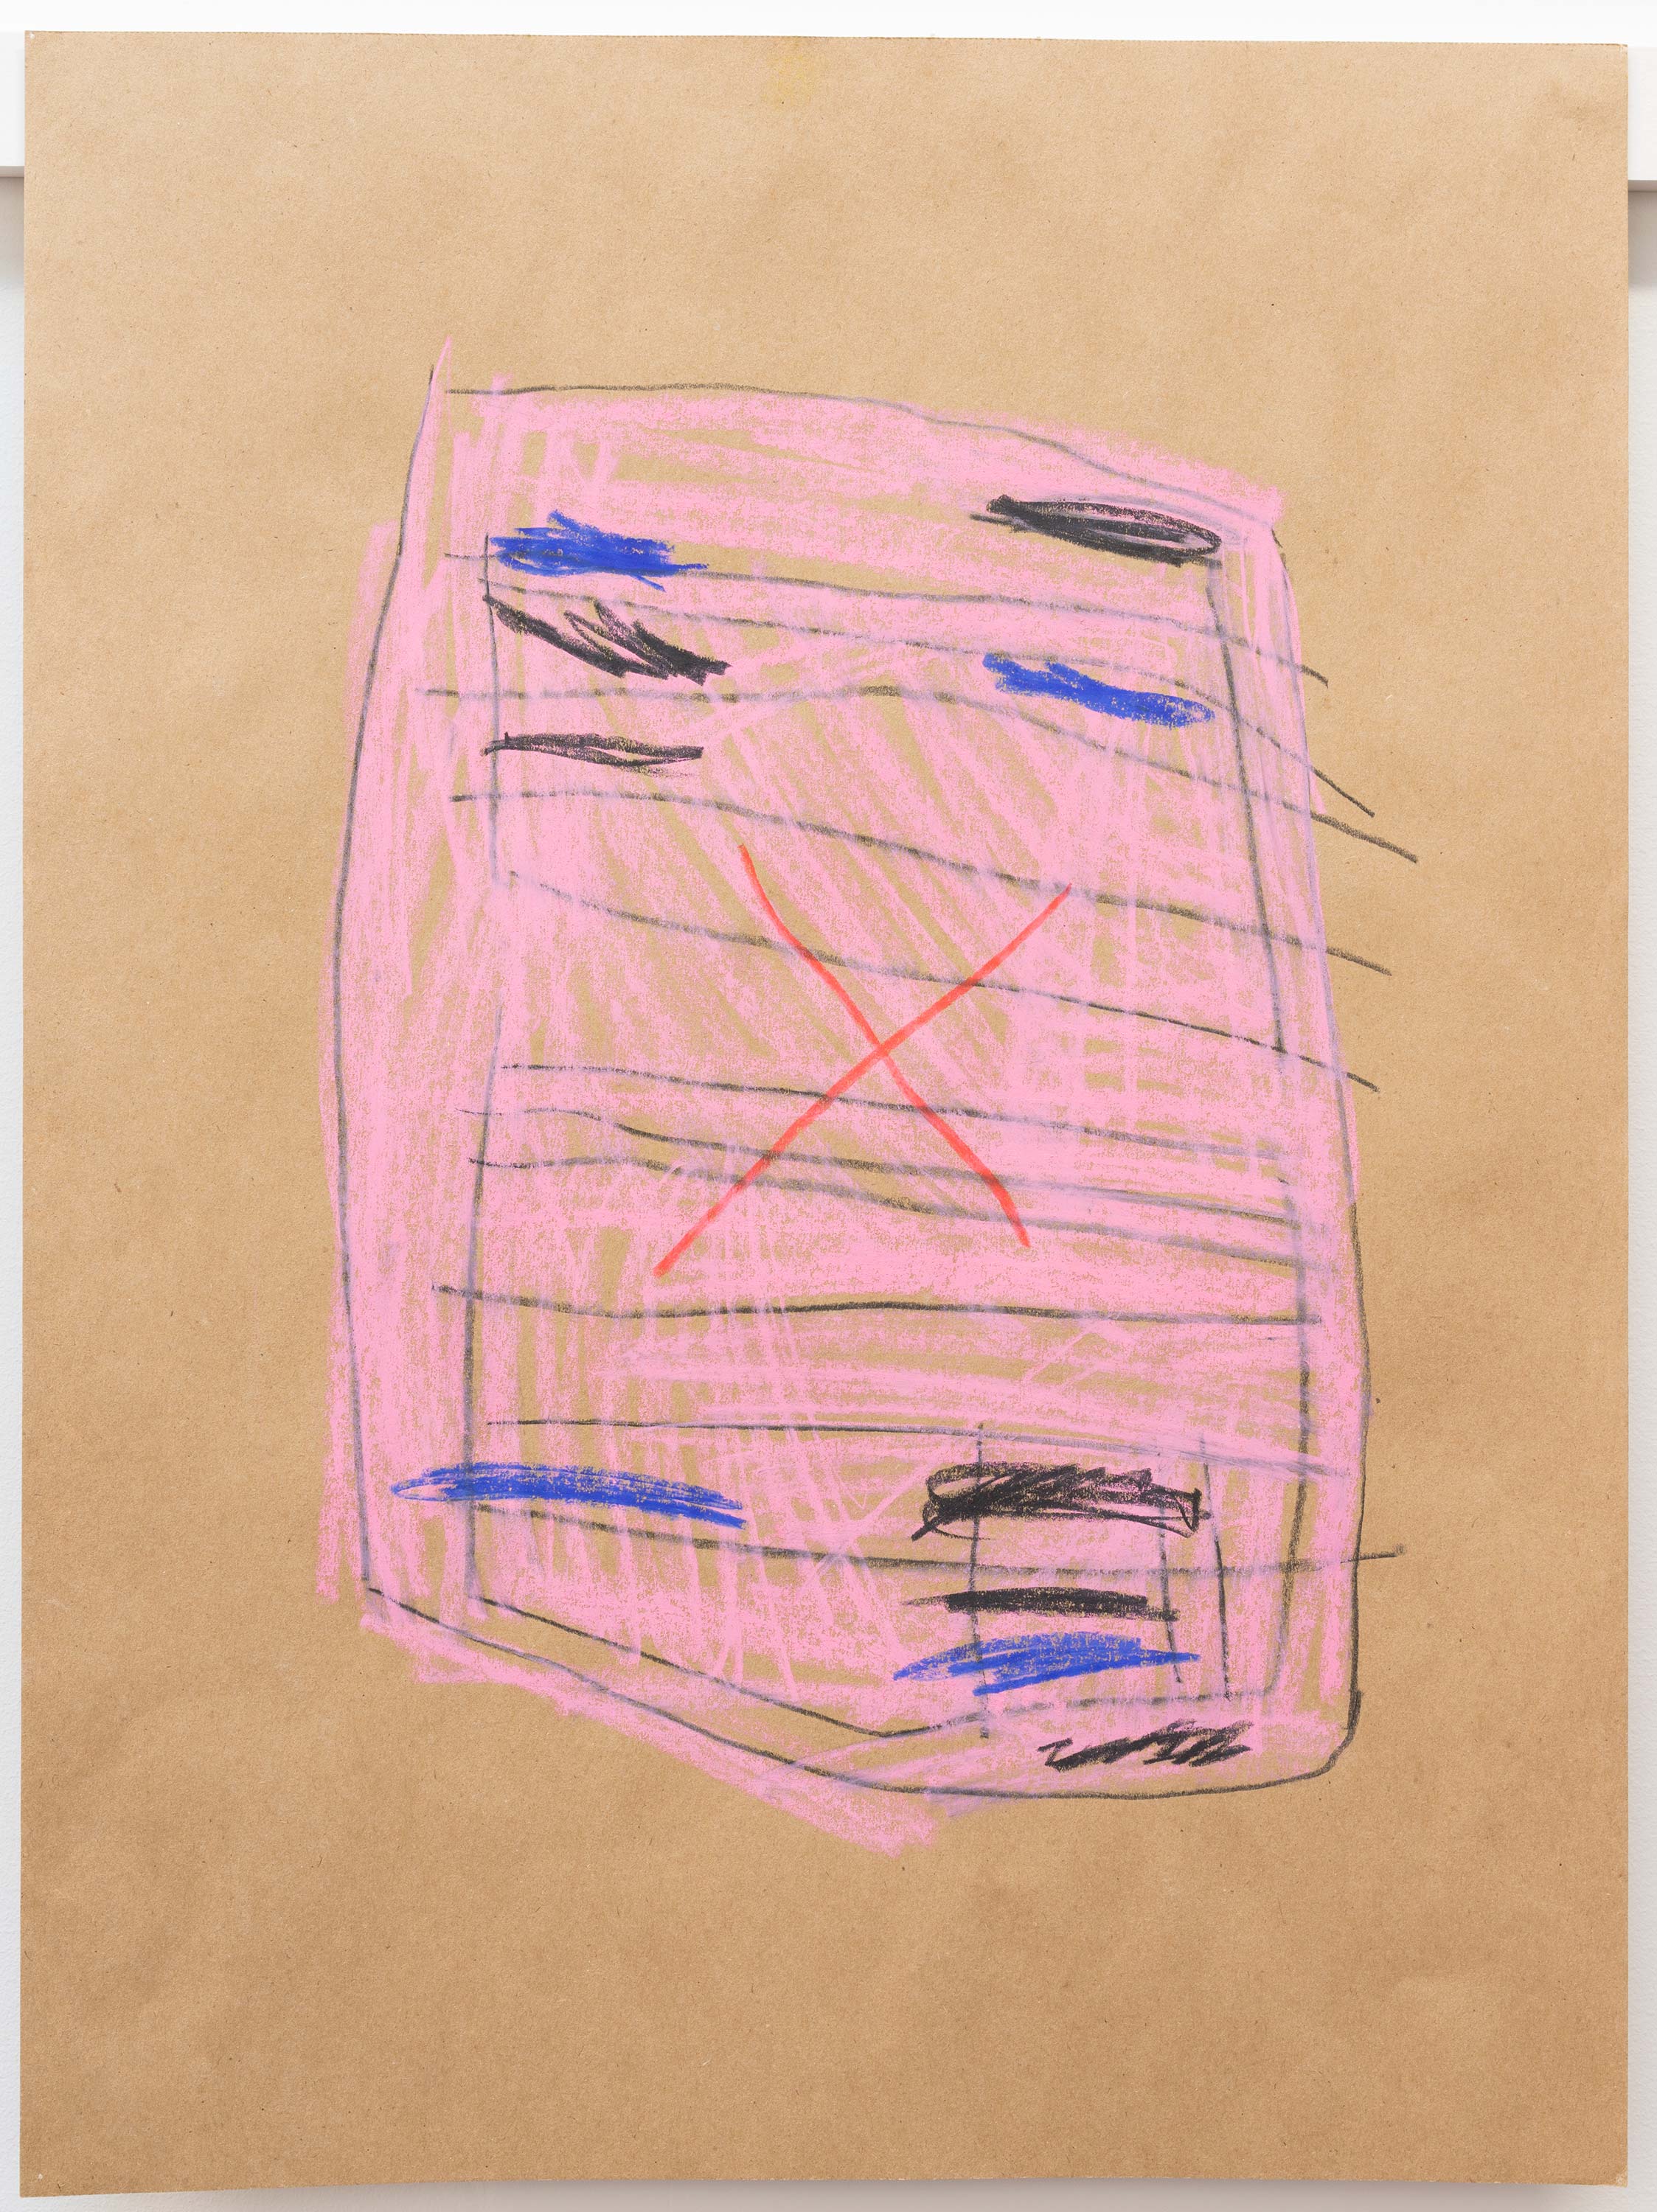 Al Freeman<br>Document pink 8<br>2015<br>Graphite and oil pastel on paper<br>18 x 24 inches (46 x 61 cm)